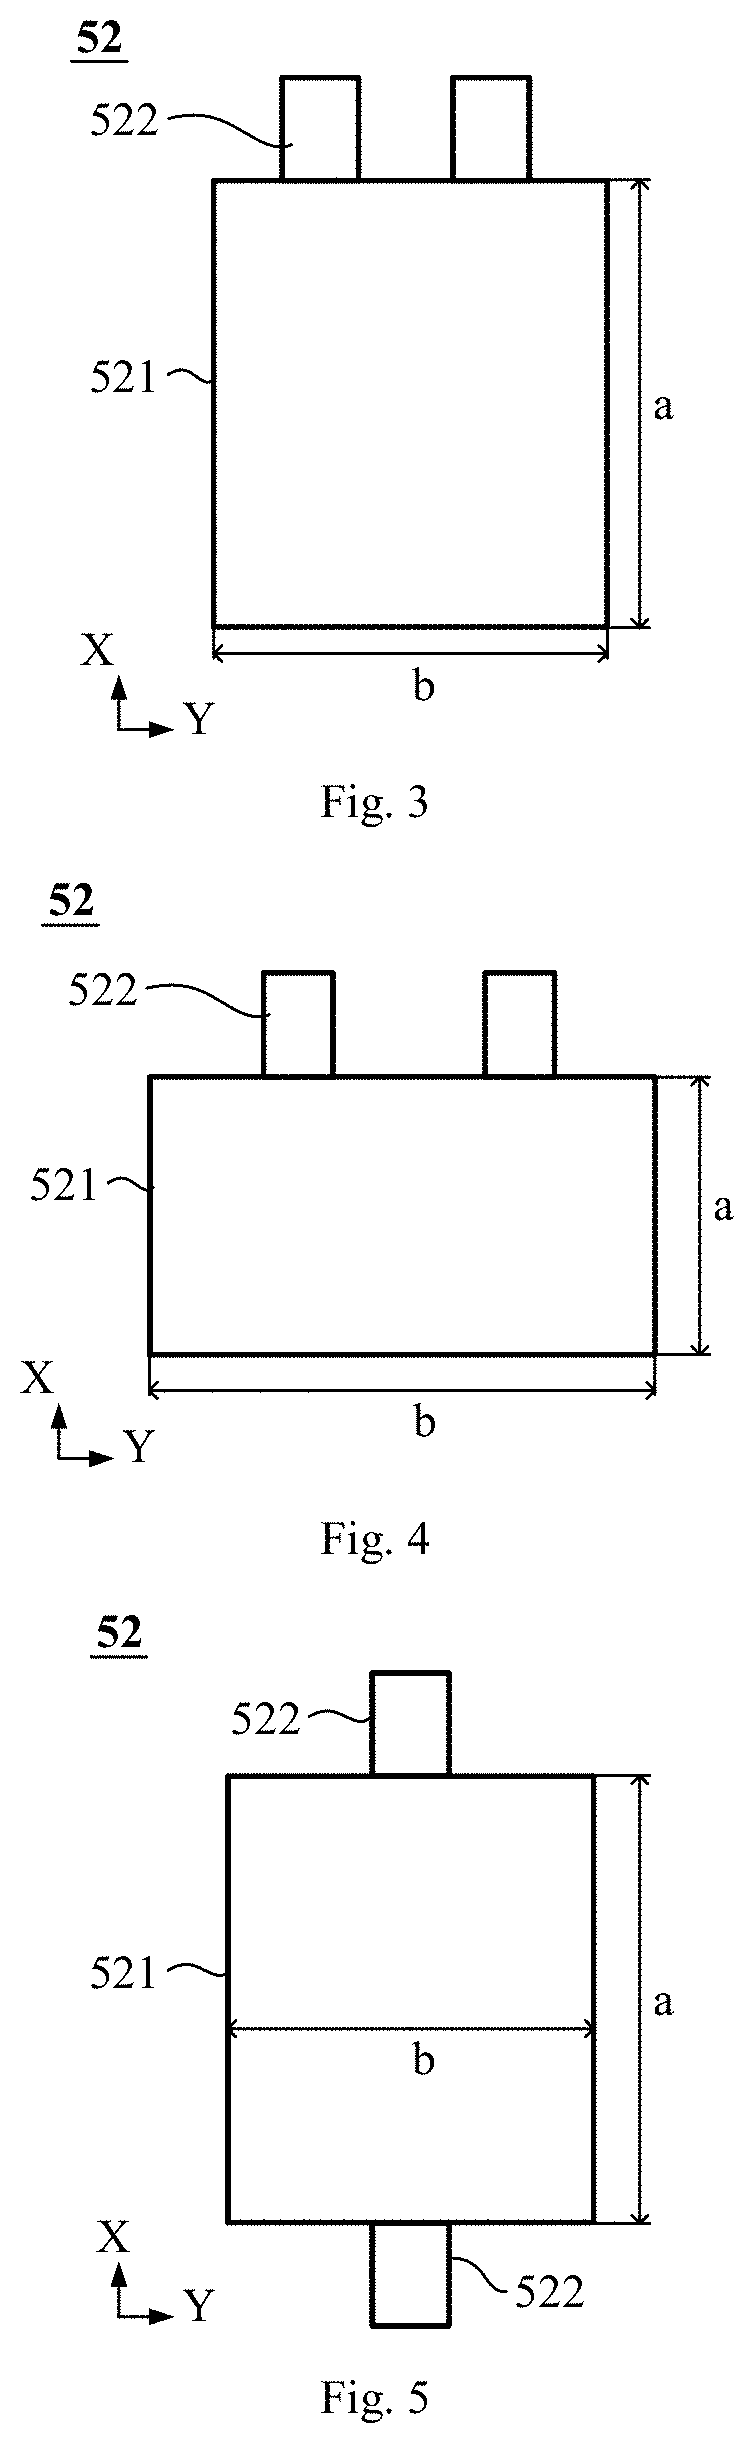 Secondary battery and apparatus containing the same